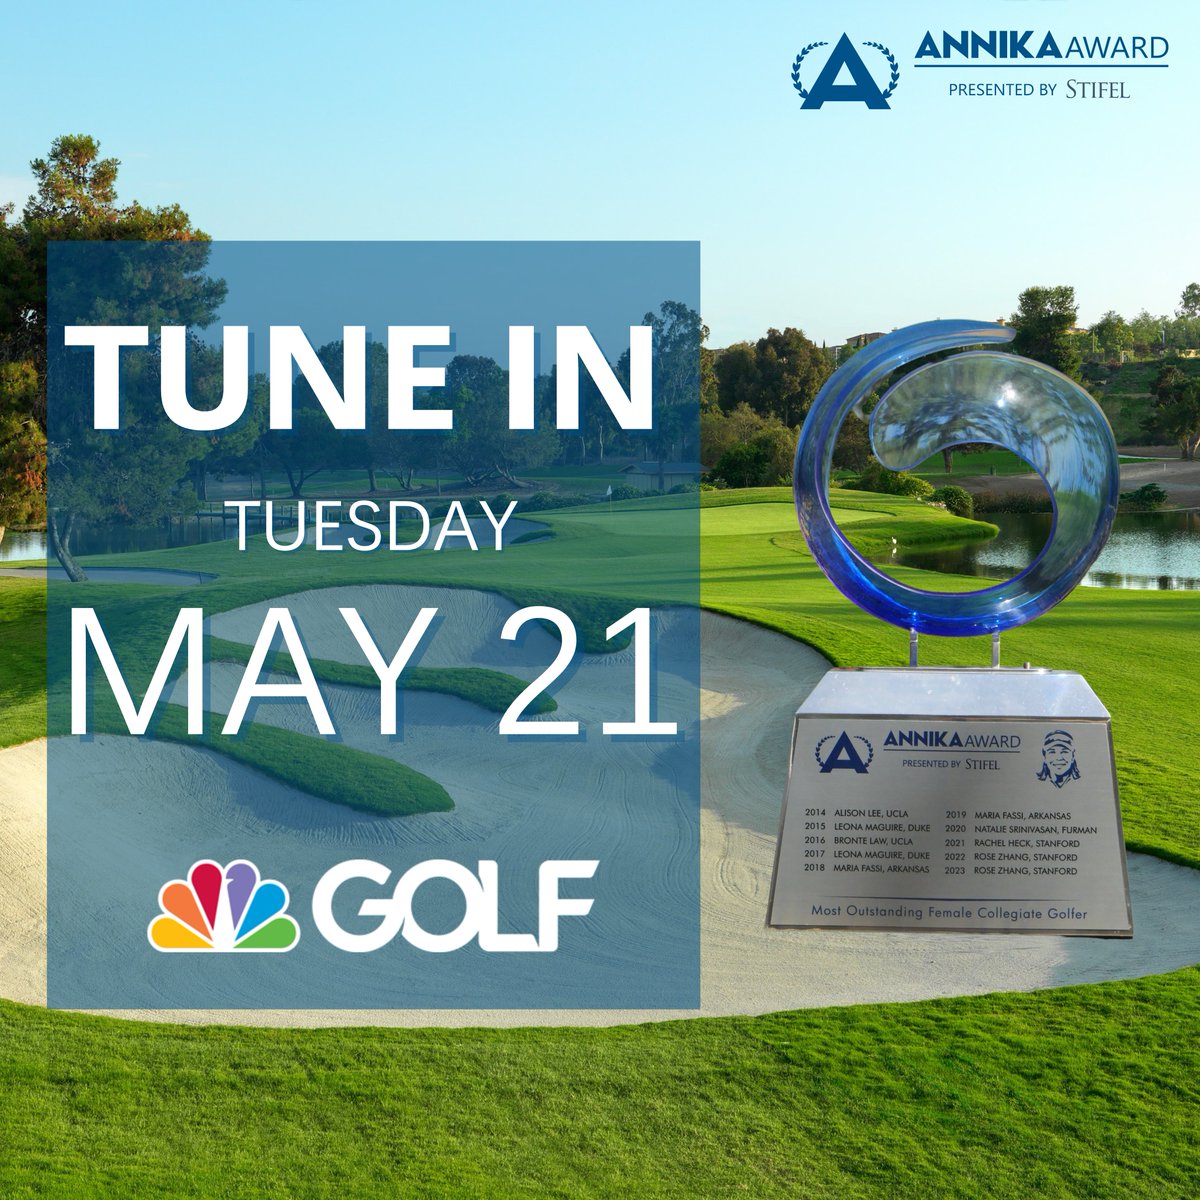 The wait is over! Tune it today to @GolfChannel to find out who will be this year's @TheAnnikaAward presented by @Stifel recipient. You won't want to miss it! 📺🏆